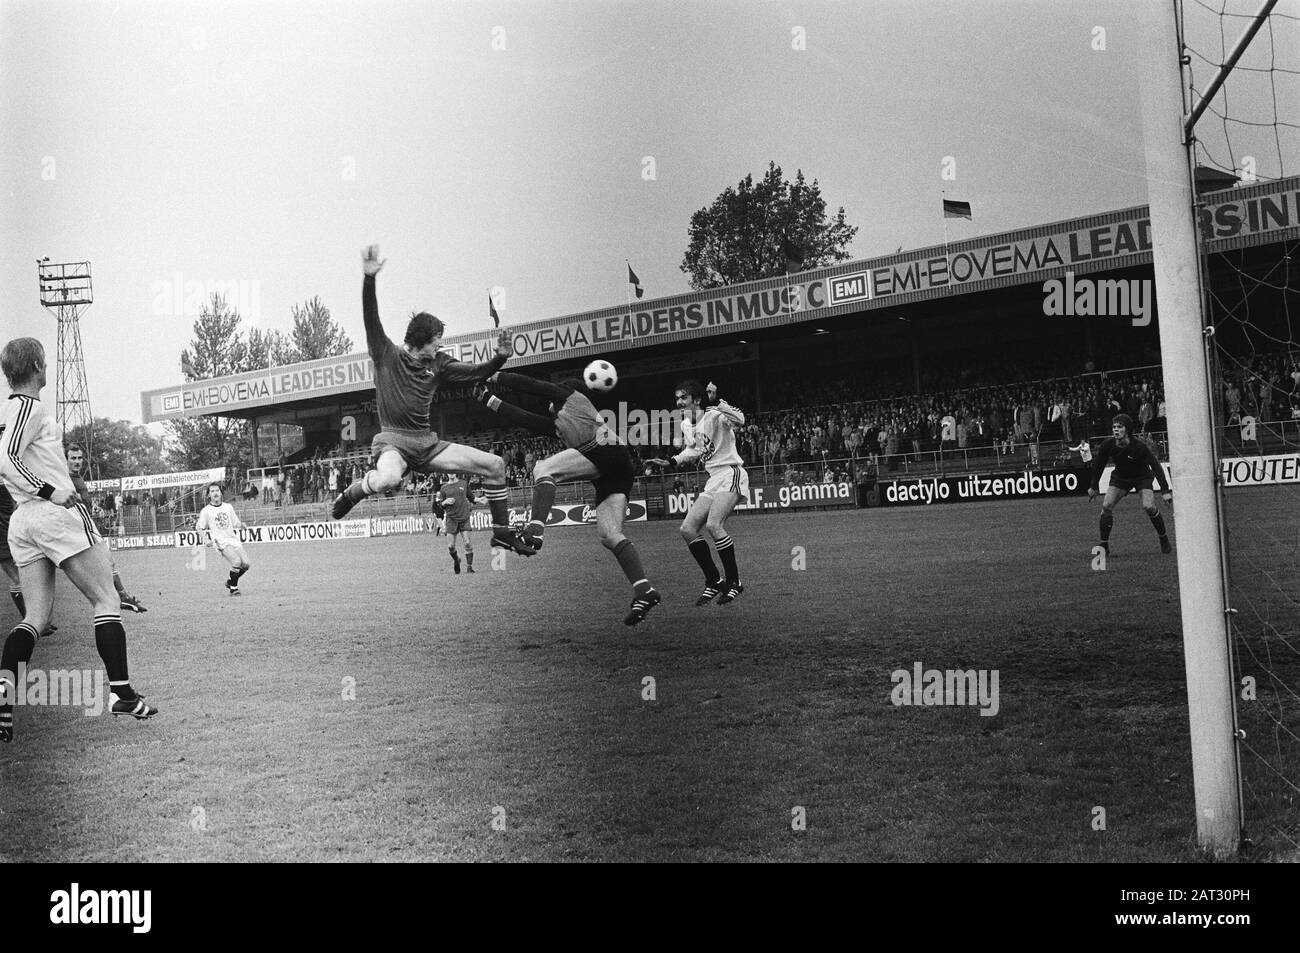 Haarlem contro NEC 2-2; NEC keeper Formanney in duello con Böckling (a sinistra) Data: 27 maggio 1979 Località: Haarlem, Noord-Holland Parole Chiave: Sport, football Nome personale: Böckling, Joop, Formannoy, Jan Institution name: NEC Foto Stock